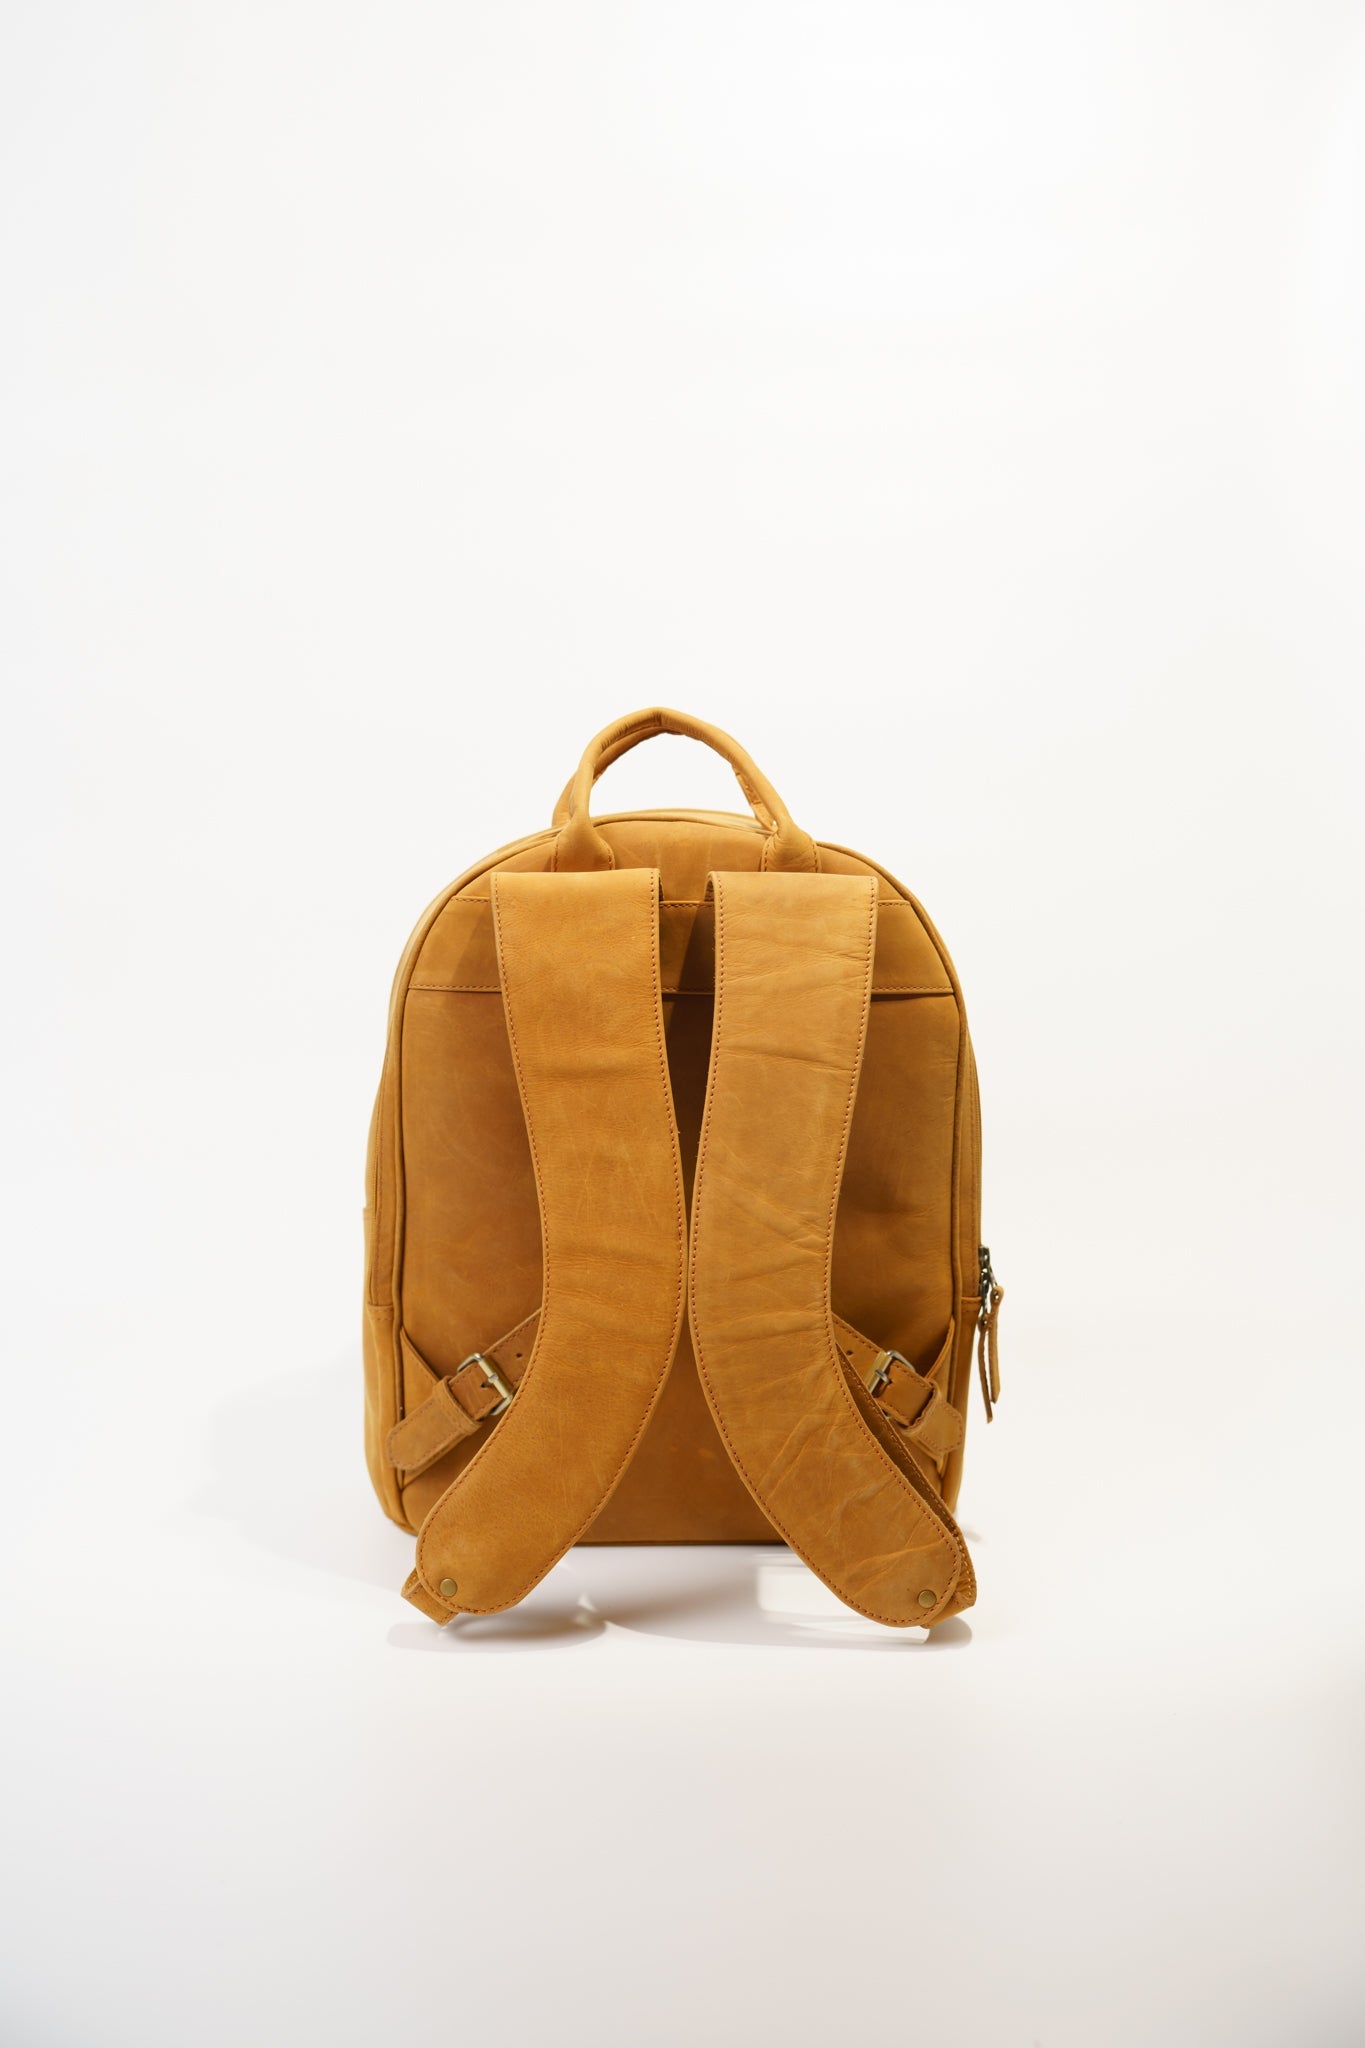 Leather Backpack for Travel & Utility